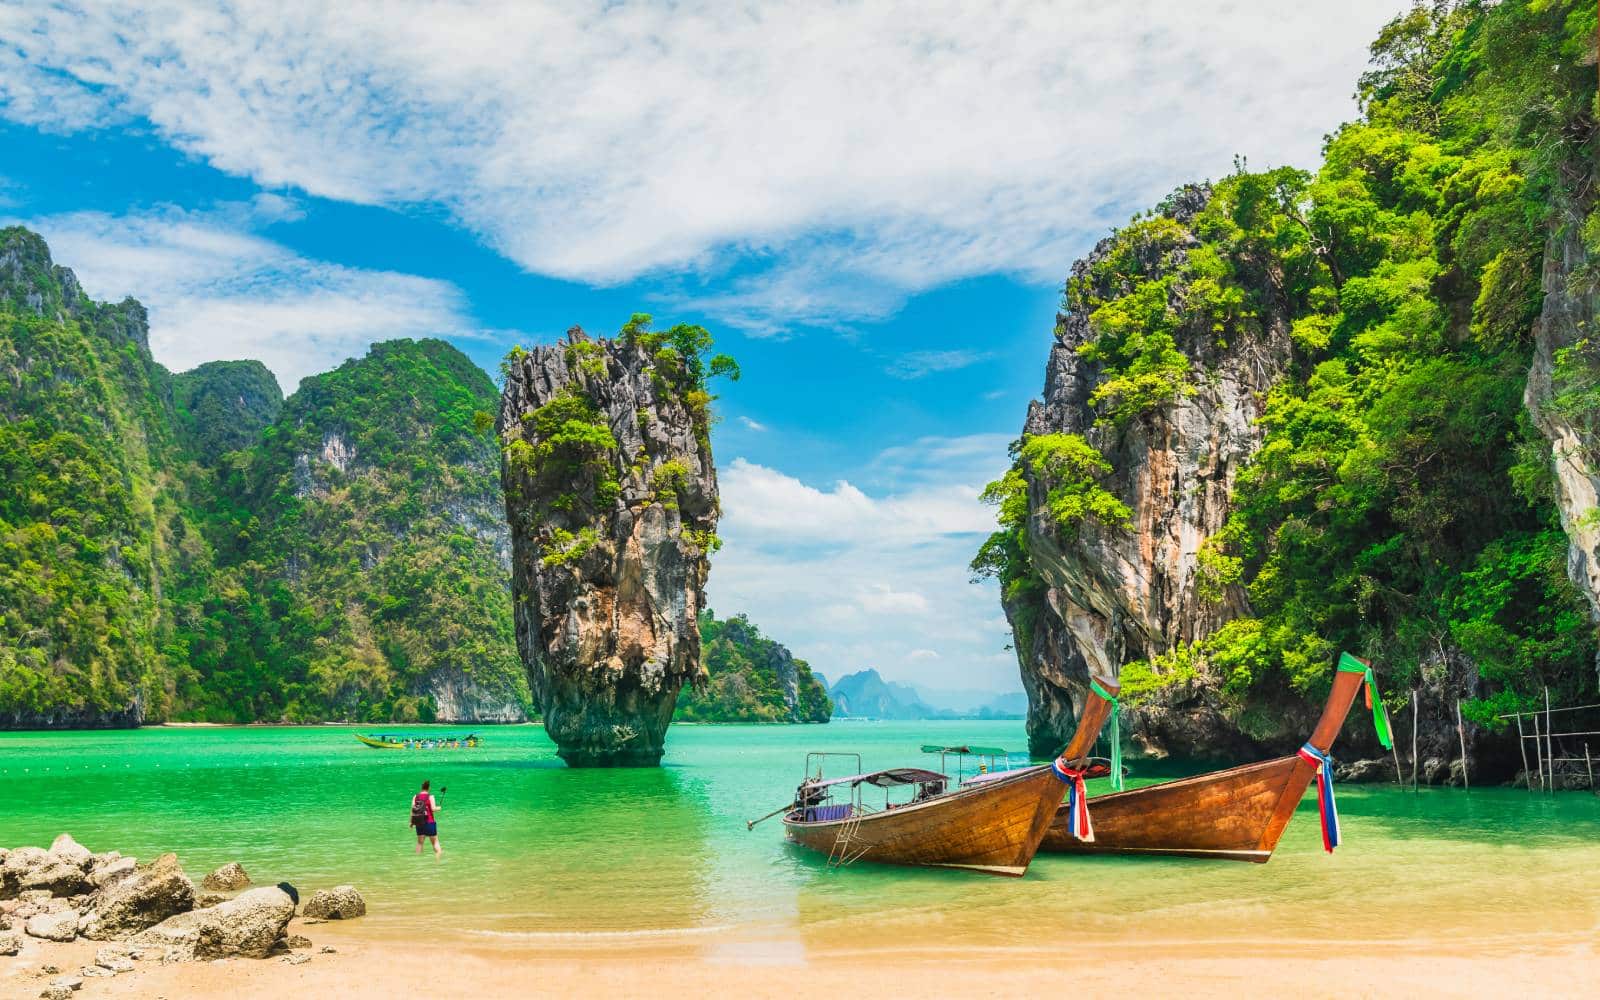 <p>Patong Beach in Phuket has a welcoming LGBTQ+ scene, with a variety of gay bars and clubs. The island’s natural beauty adds to its appeal.</p>